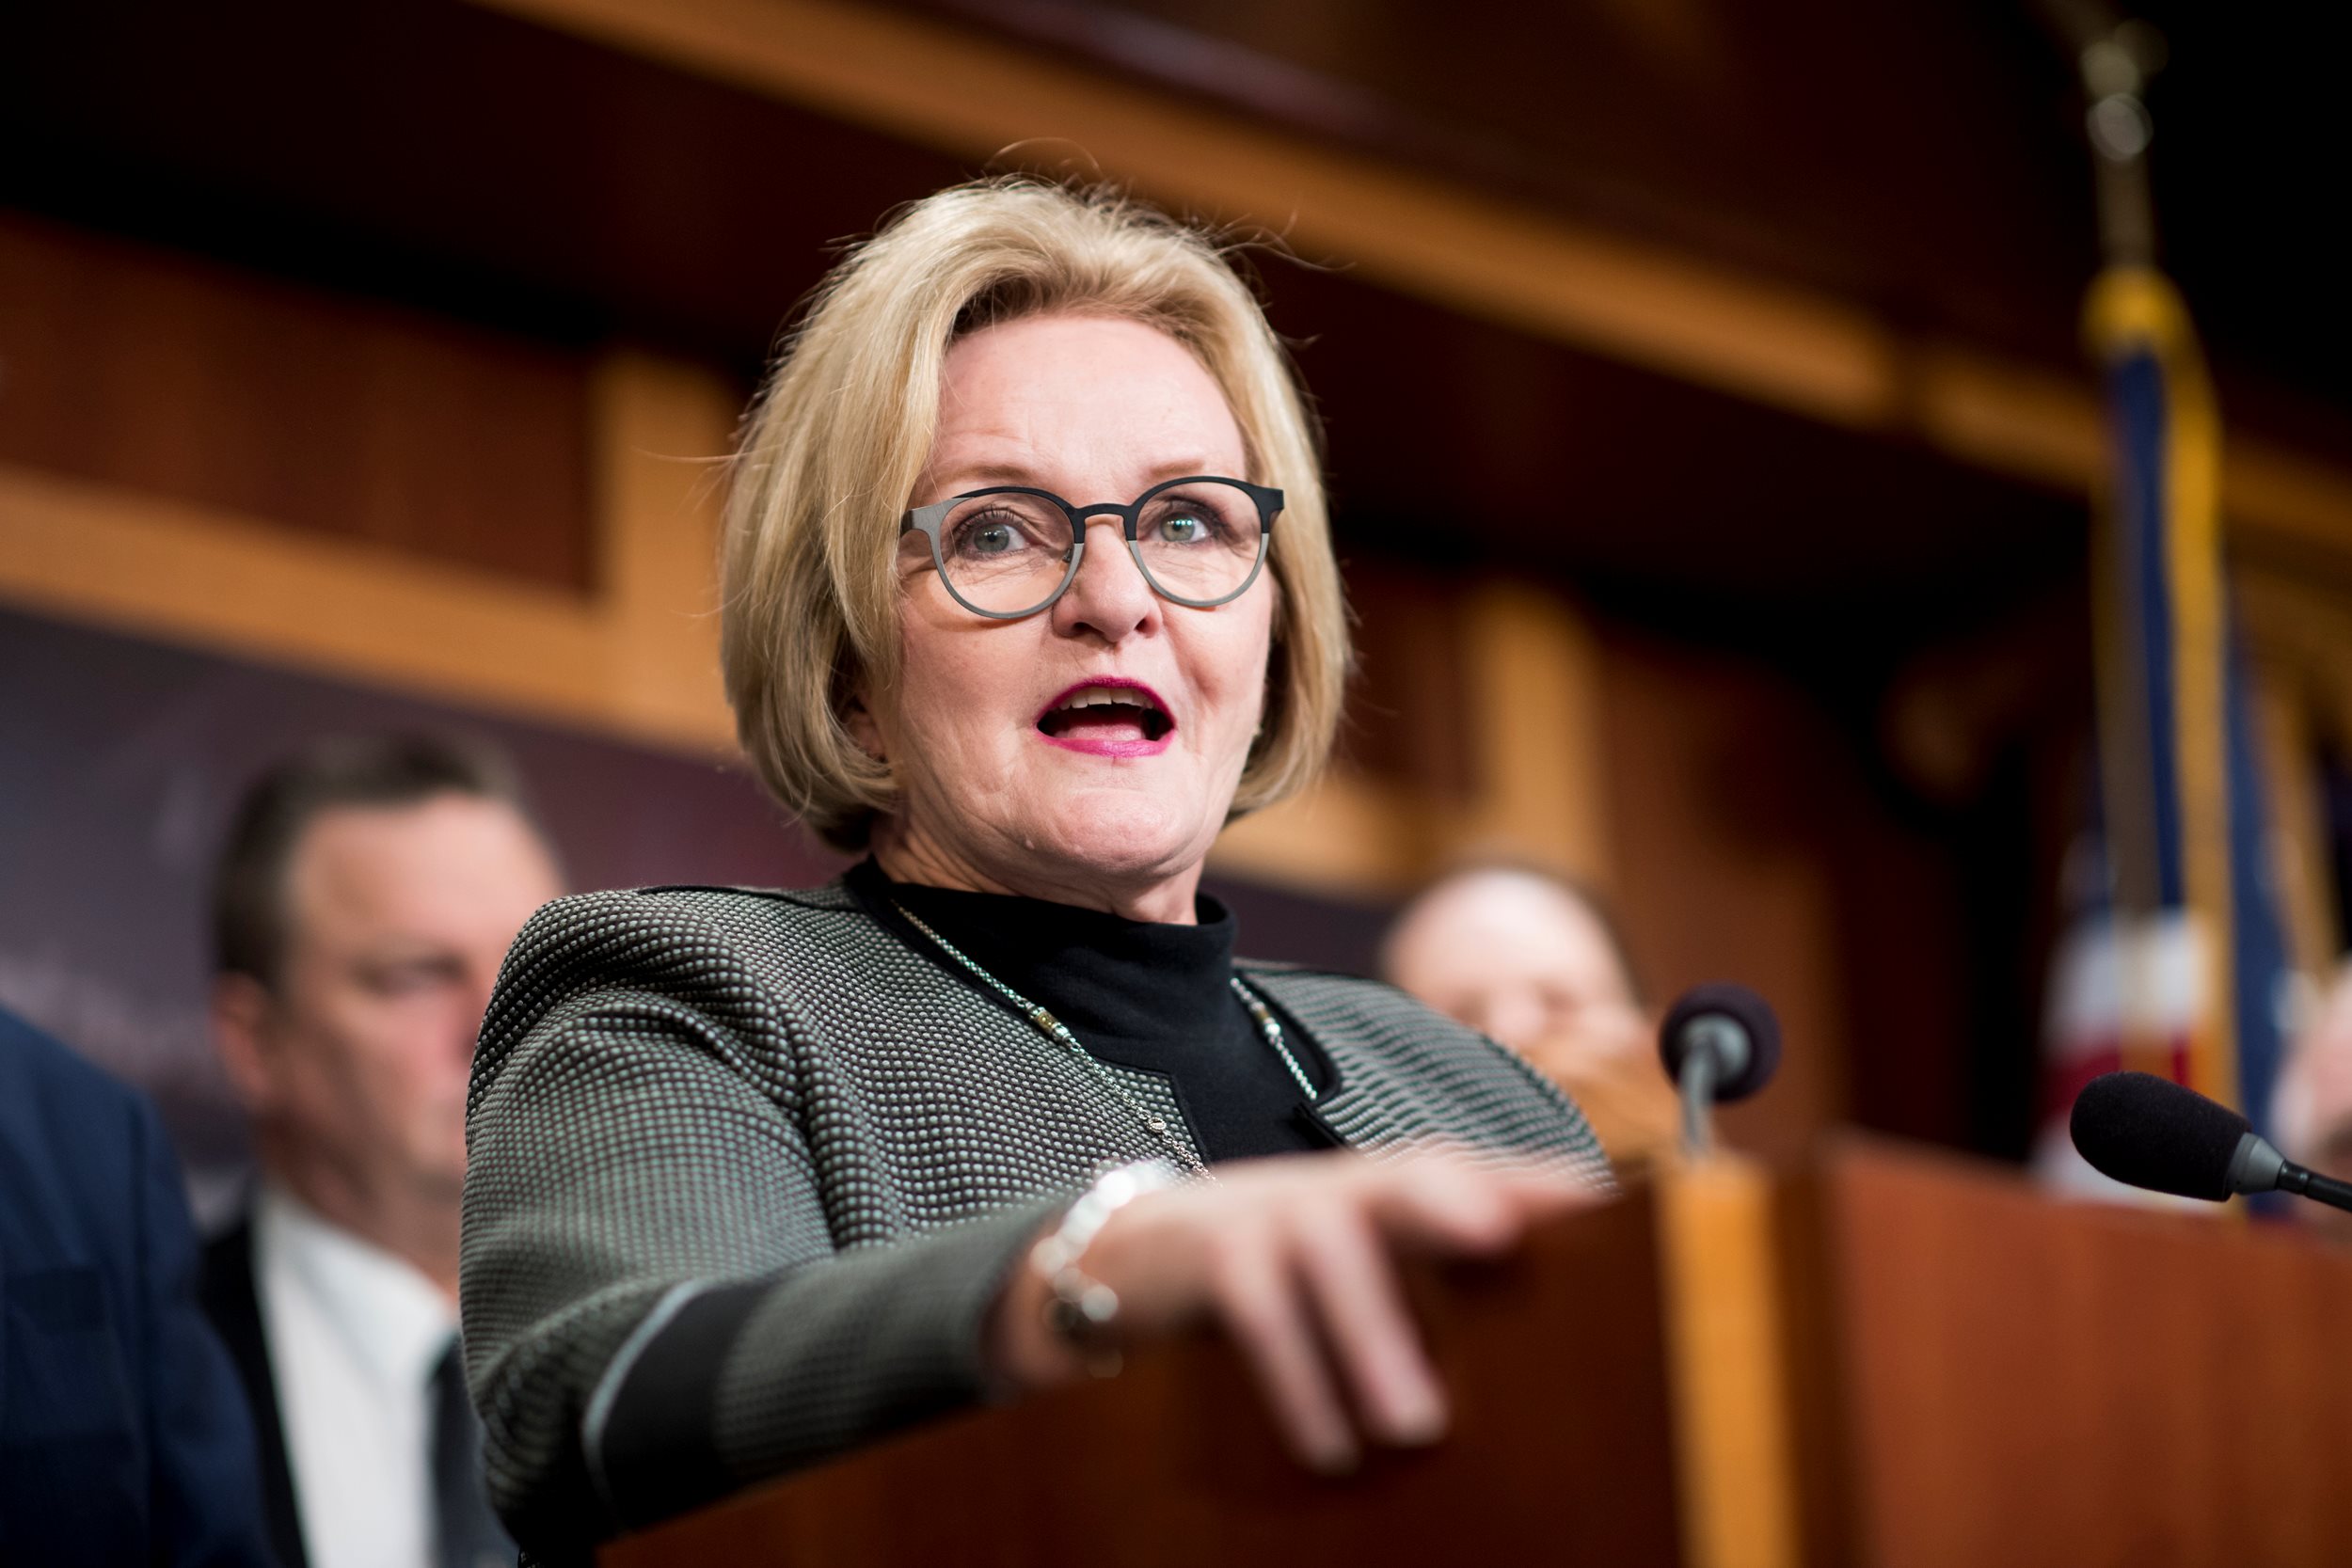 Claire McCaskill, Biography & Facts